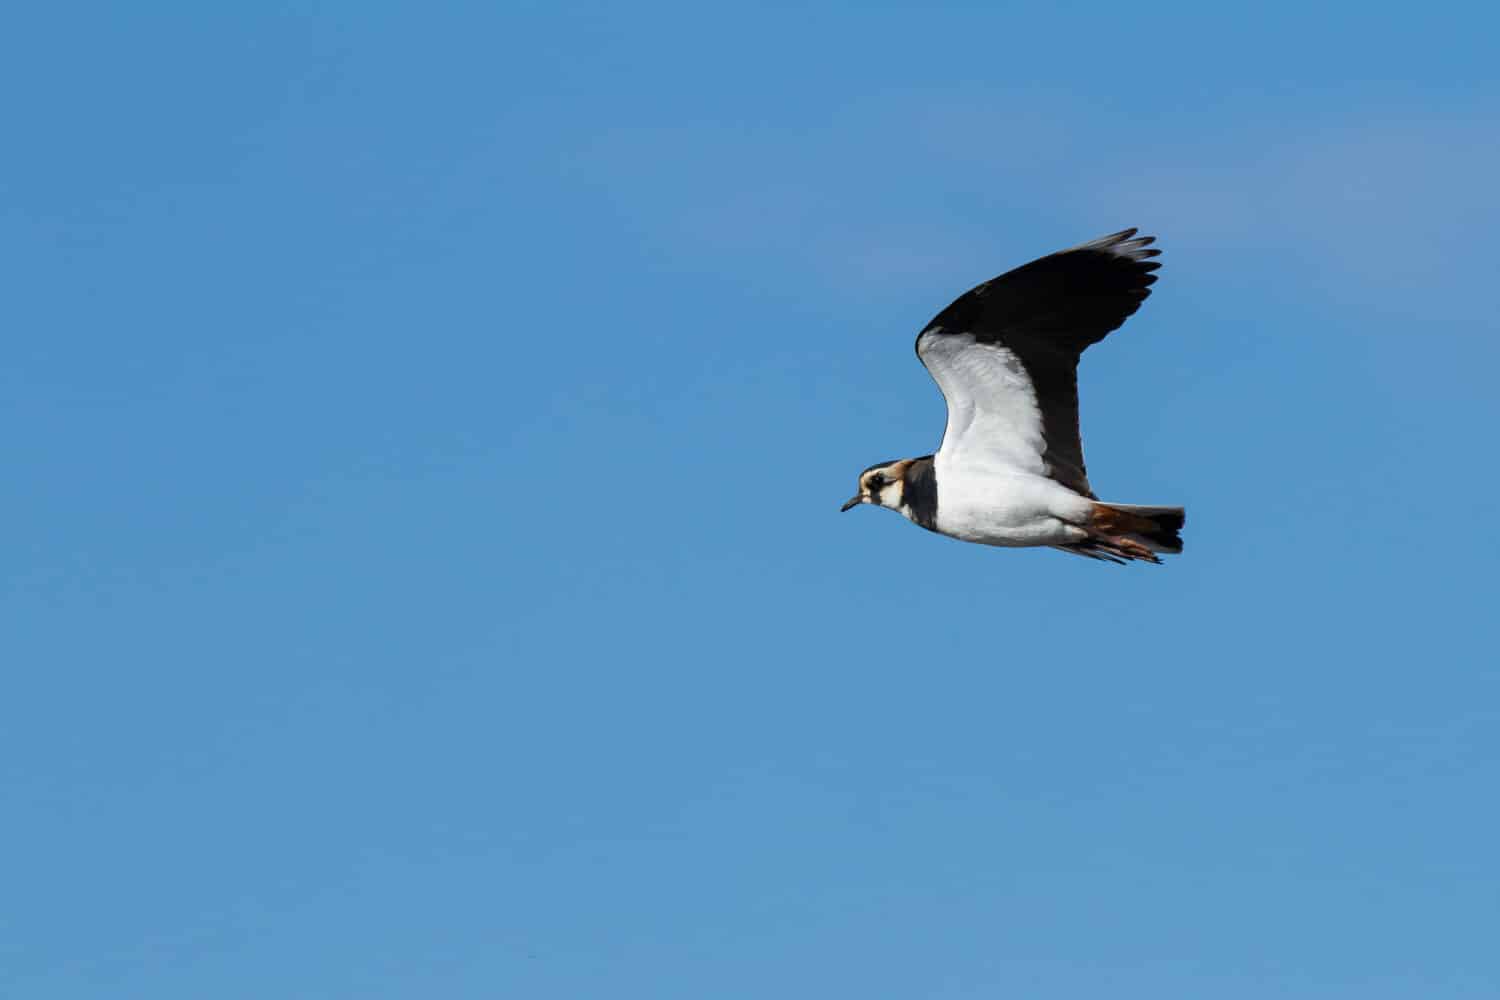 A selective focus shot of a Northern lapwing or Vanellus vanellus bird flying under the blue sky